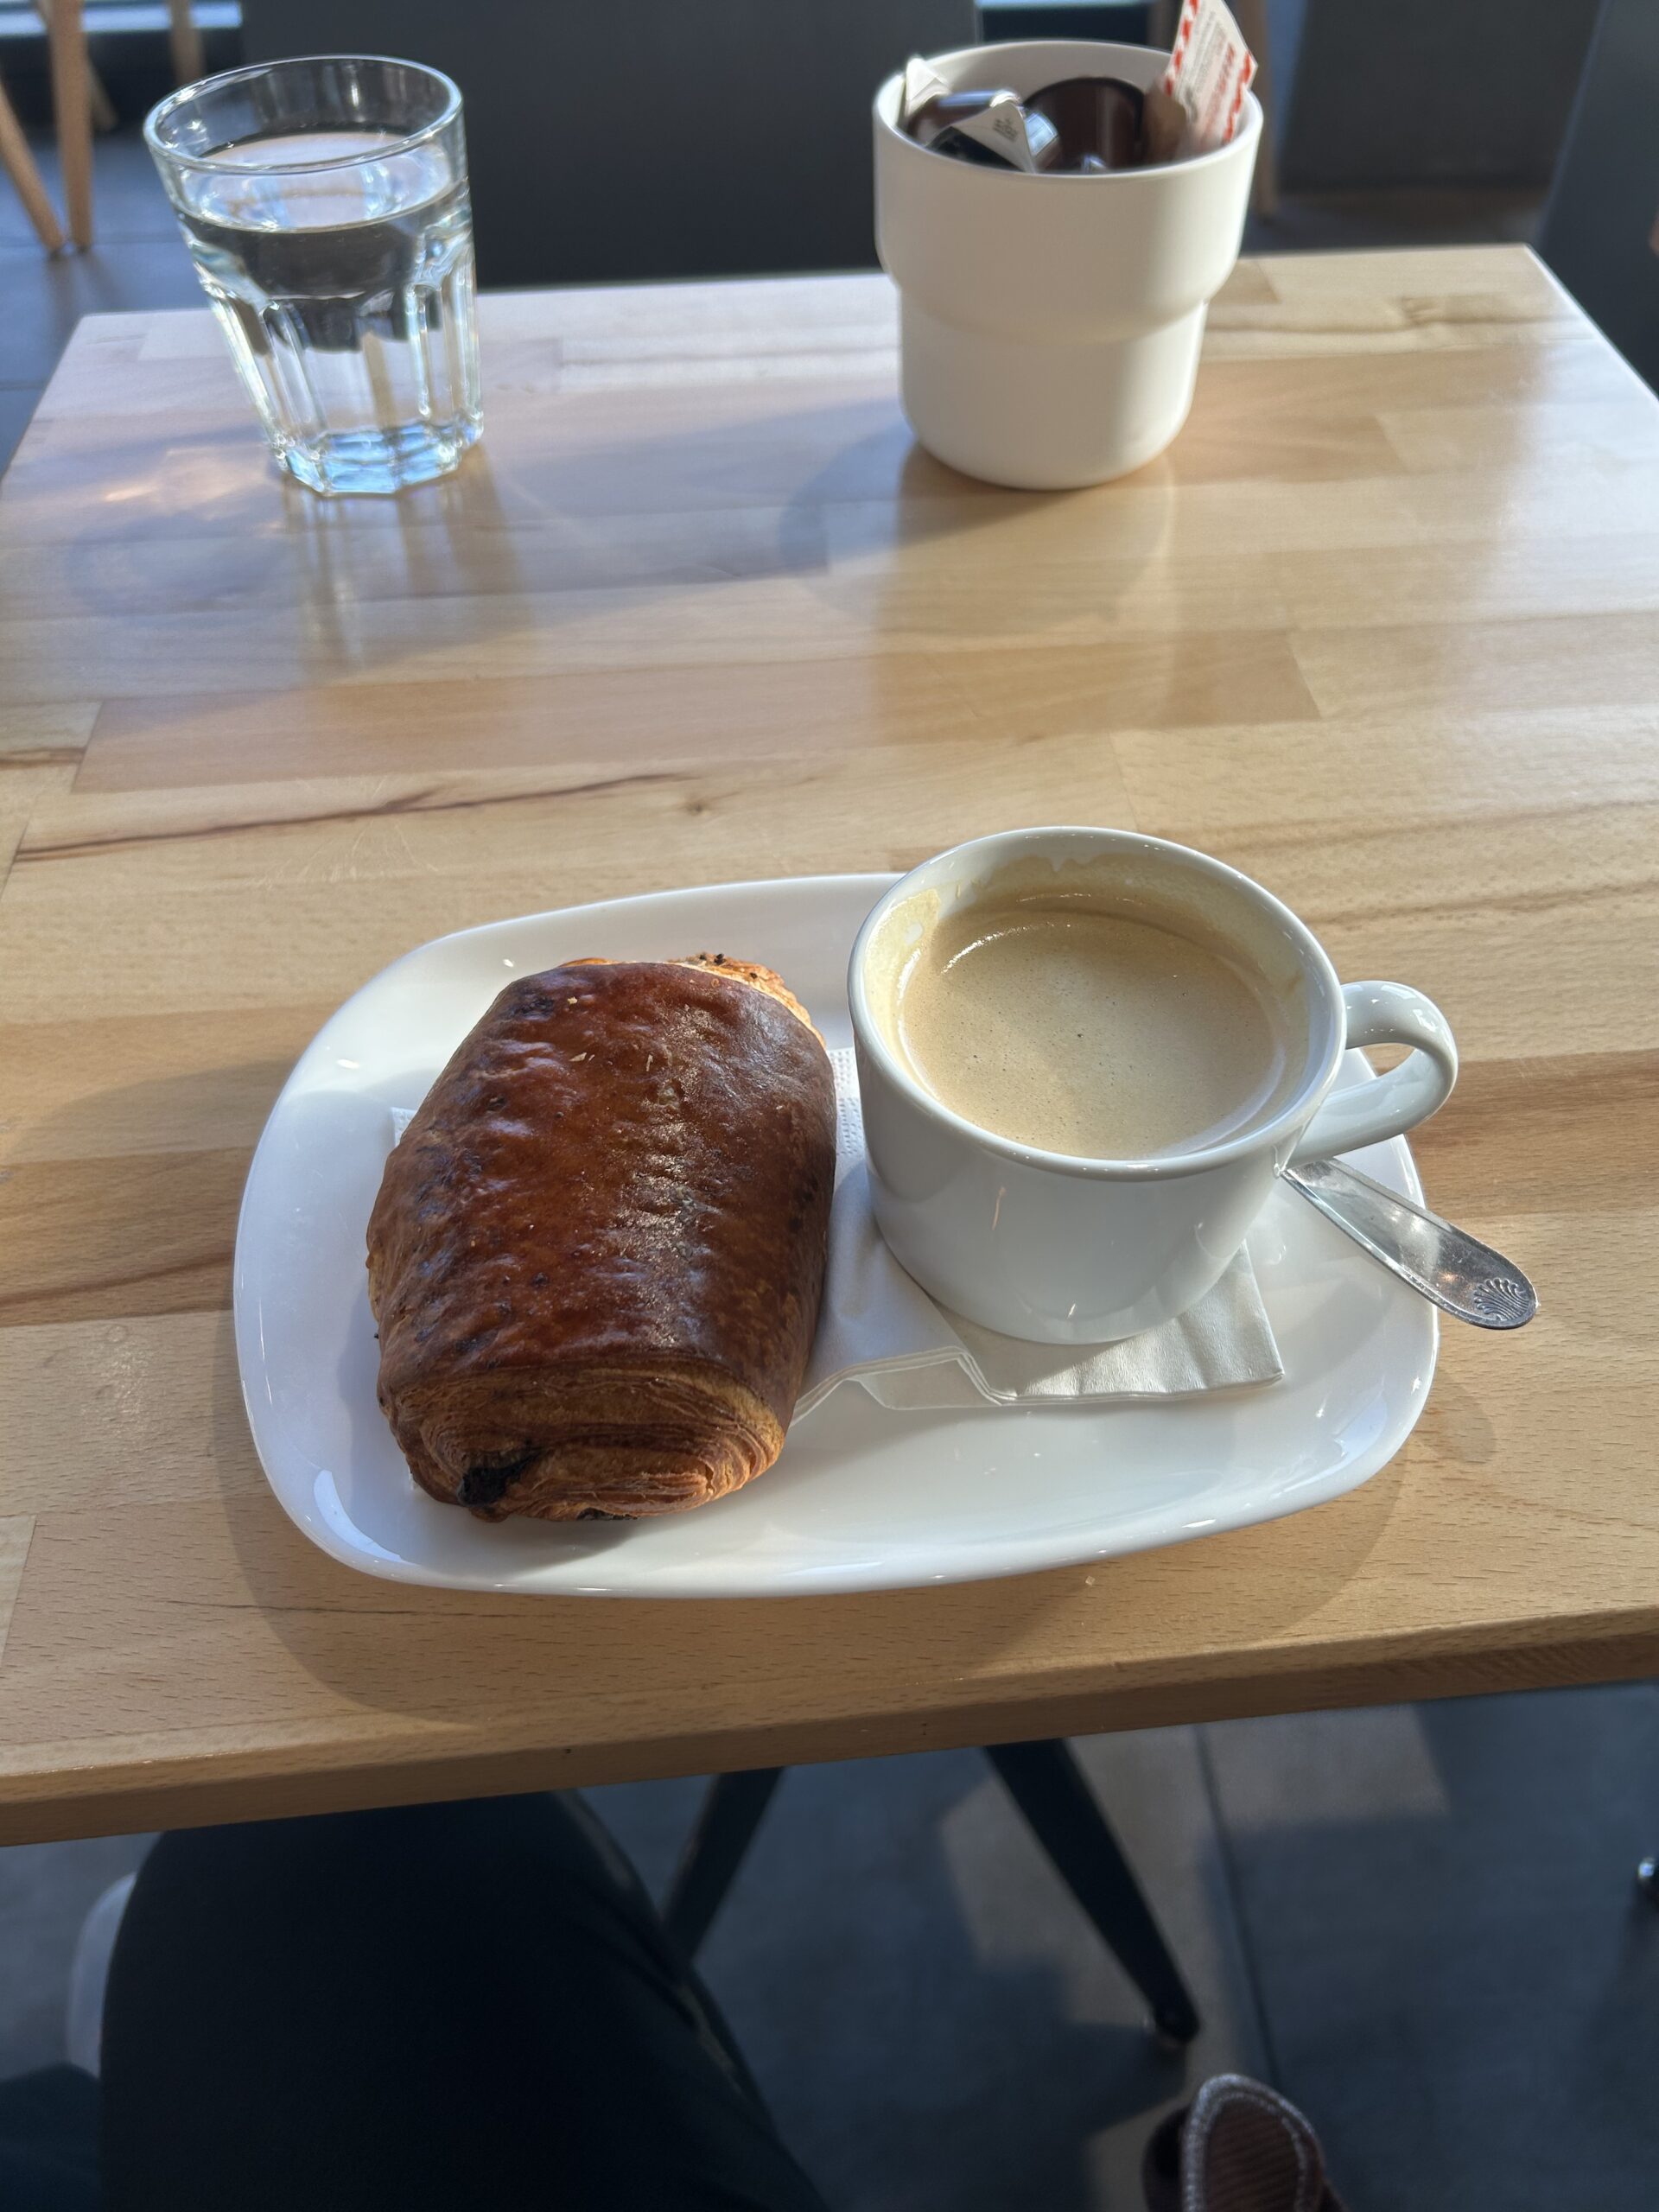 A chocolate croissant and cup of coffee